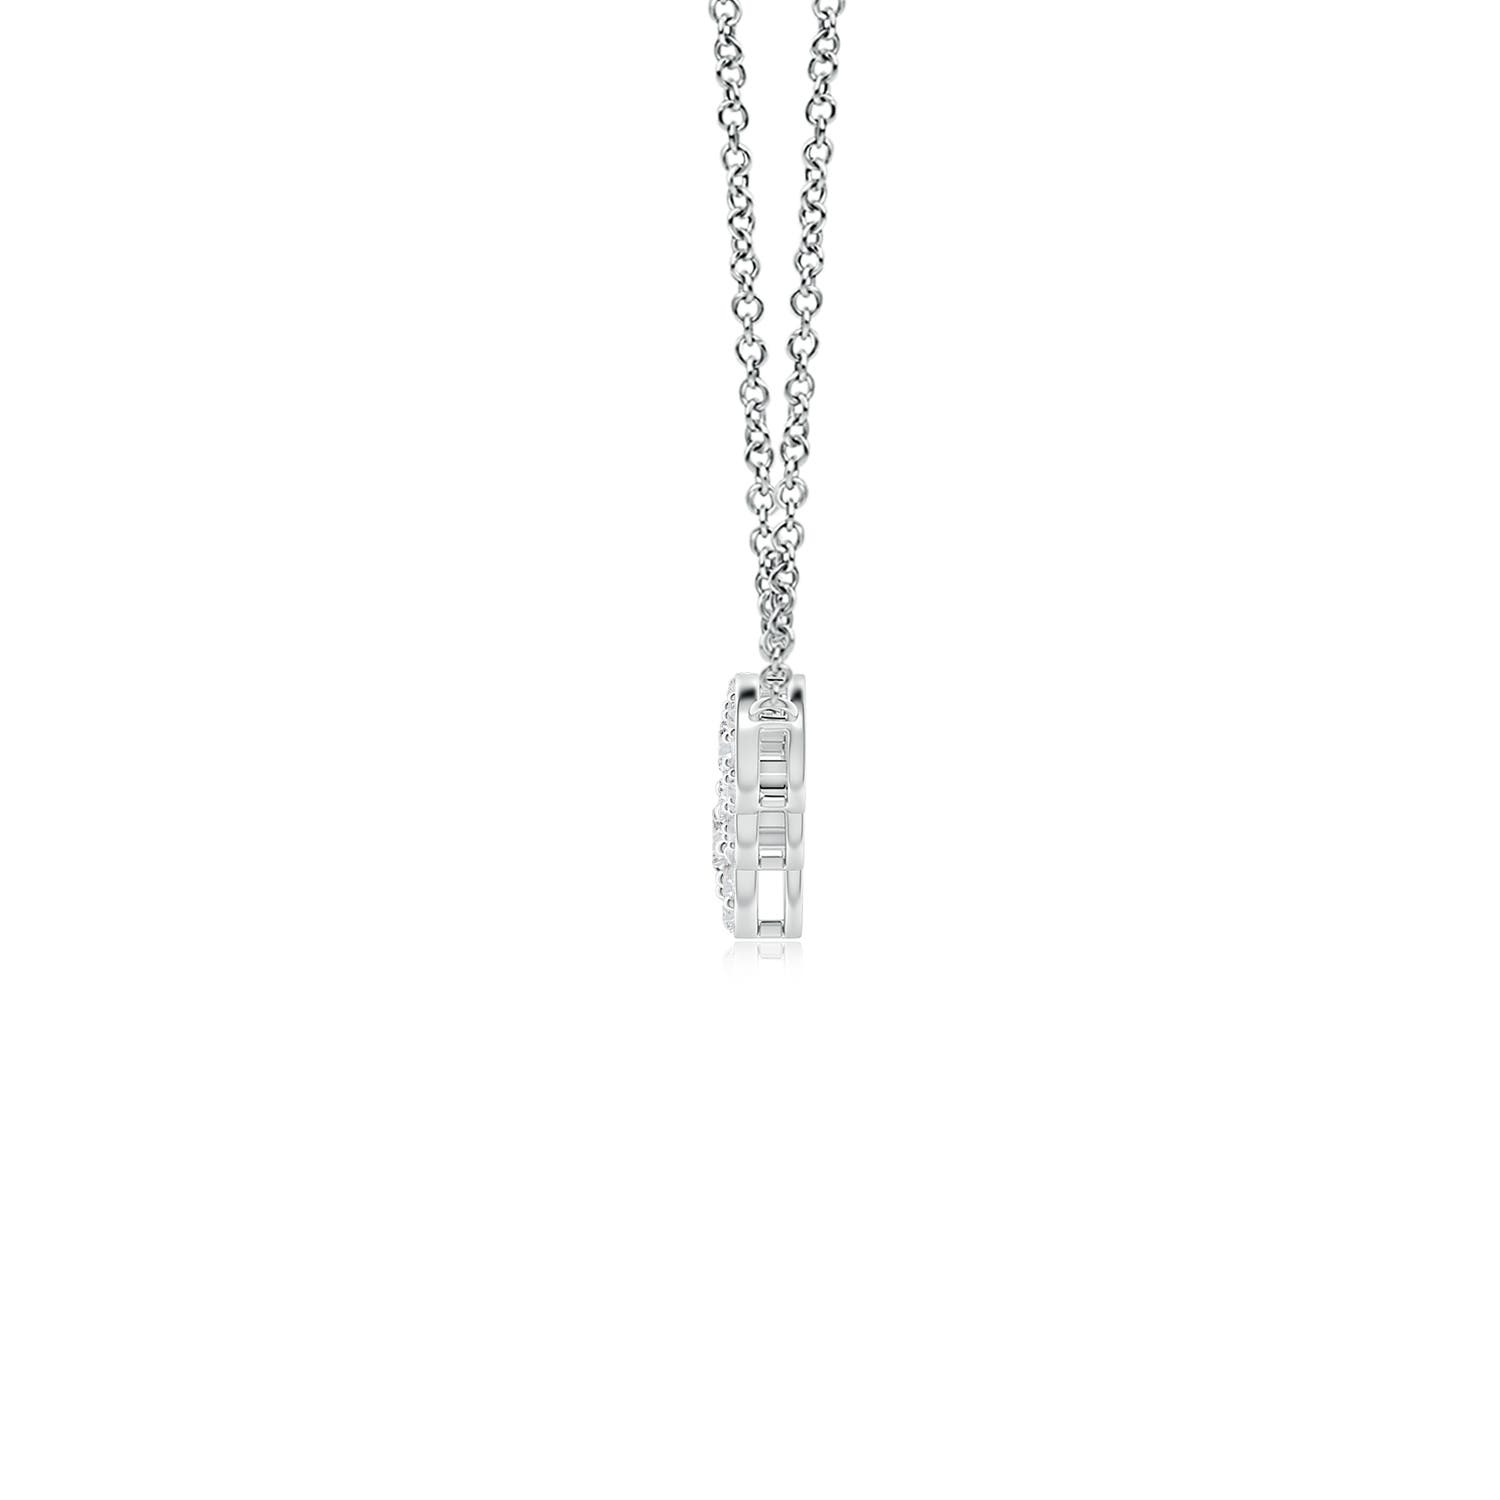 H, SI2 / 1.01 CT / 14 KT White Gold